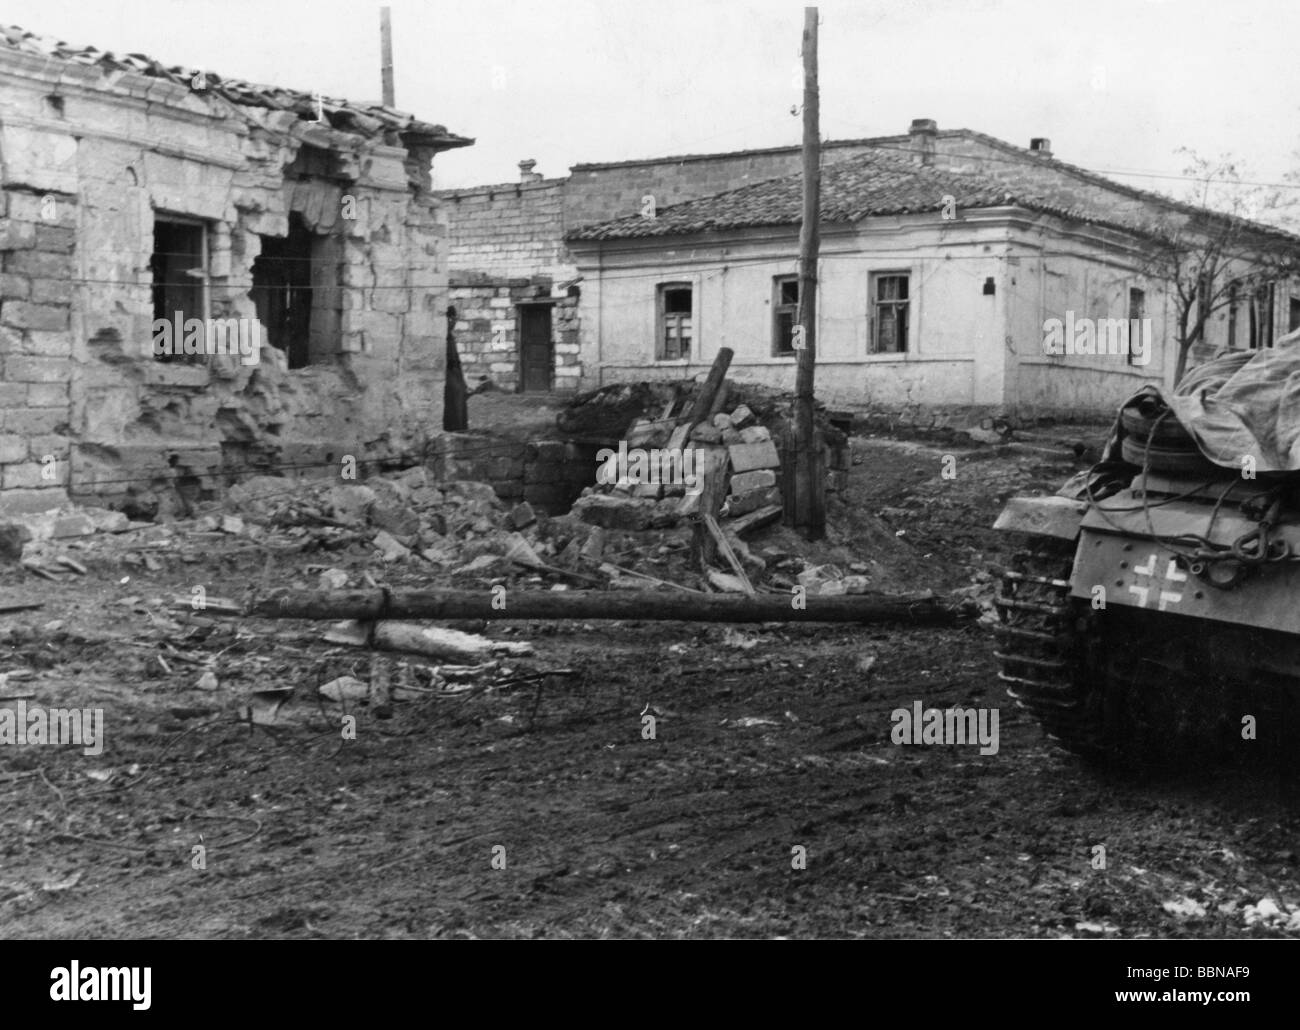 events, Second World War / WWII, Russia 1942 / 1943, Crimea, Ukraine, destructions in the outskirts of Kerch after a failed Soviet landing operation, late 1943, right hand the rear of a German assault gun, Wehrmacht, Soviet Union, tank, USSR, 20th century, historic, historical, ruin, ruins, destruction, houses, buildings, 1940s, Stock Photo